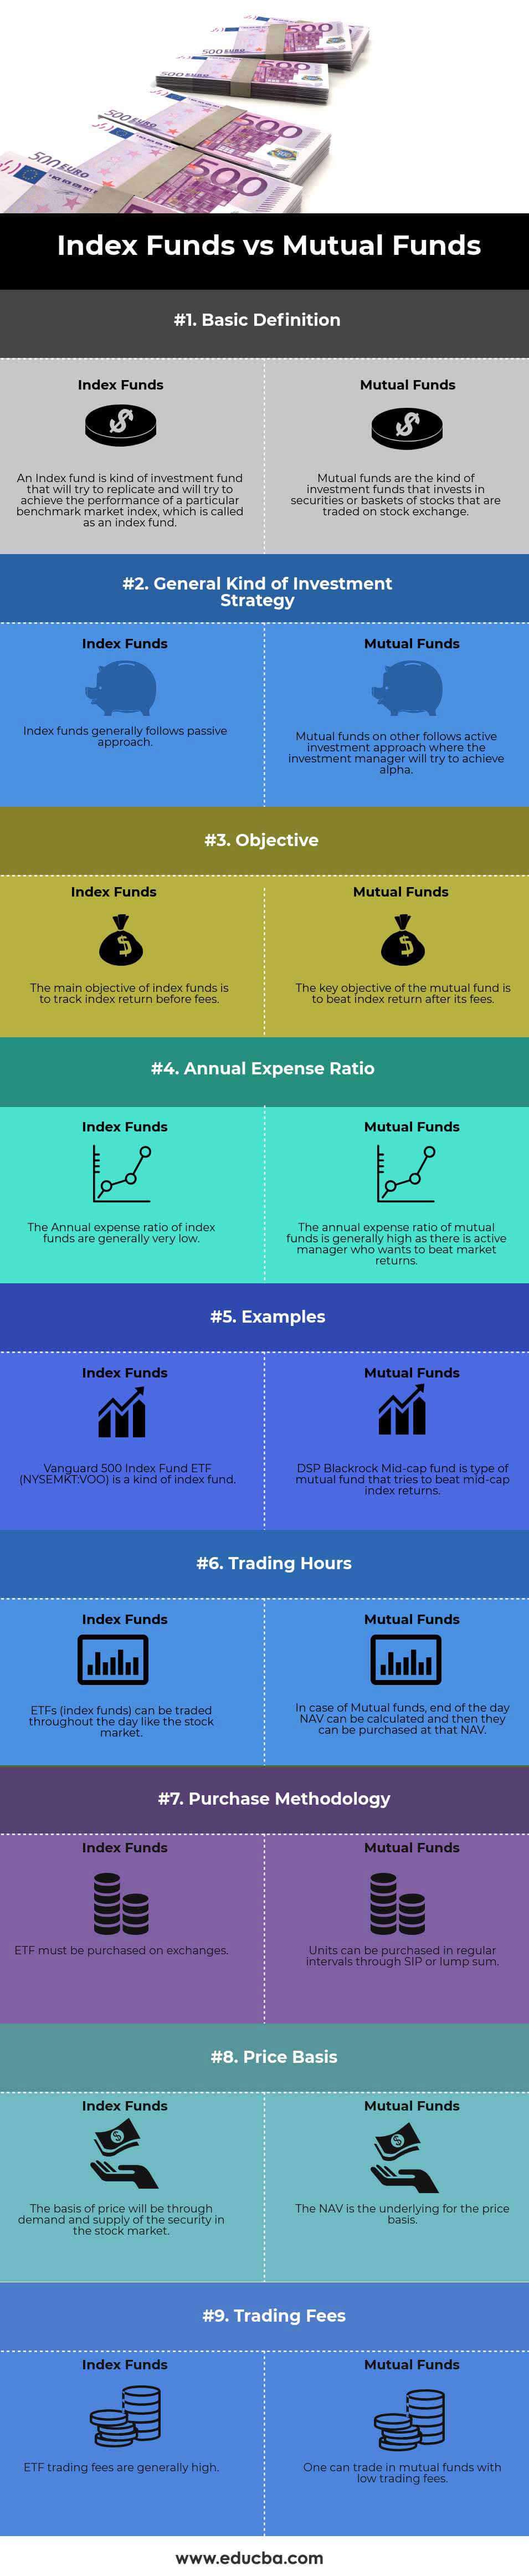 Index-Funds-vs-Mutual-Funds-info